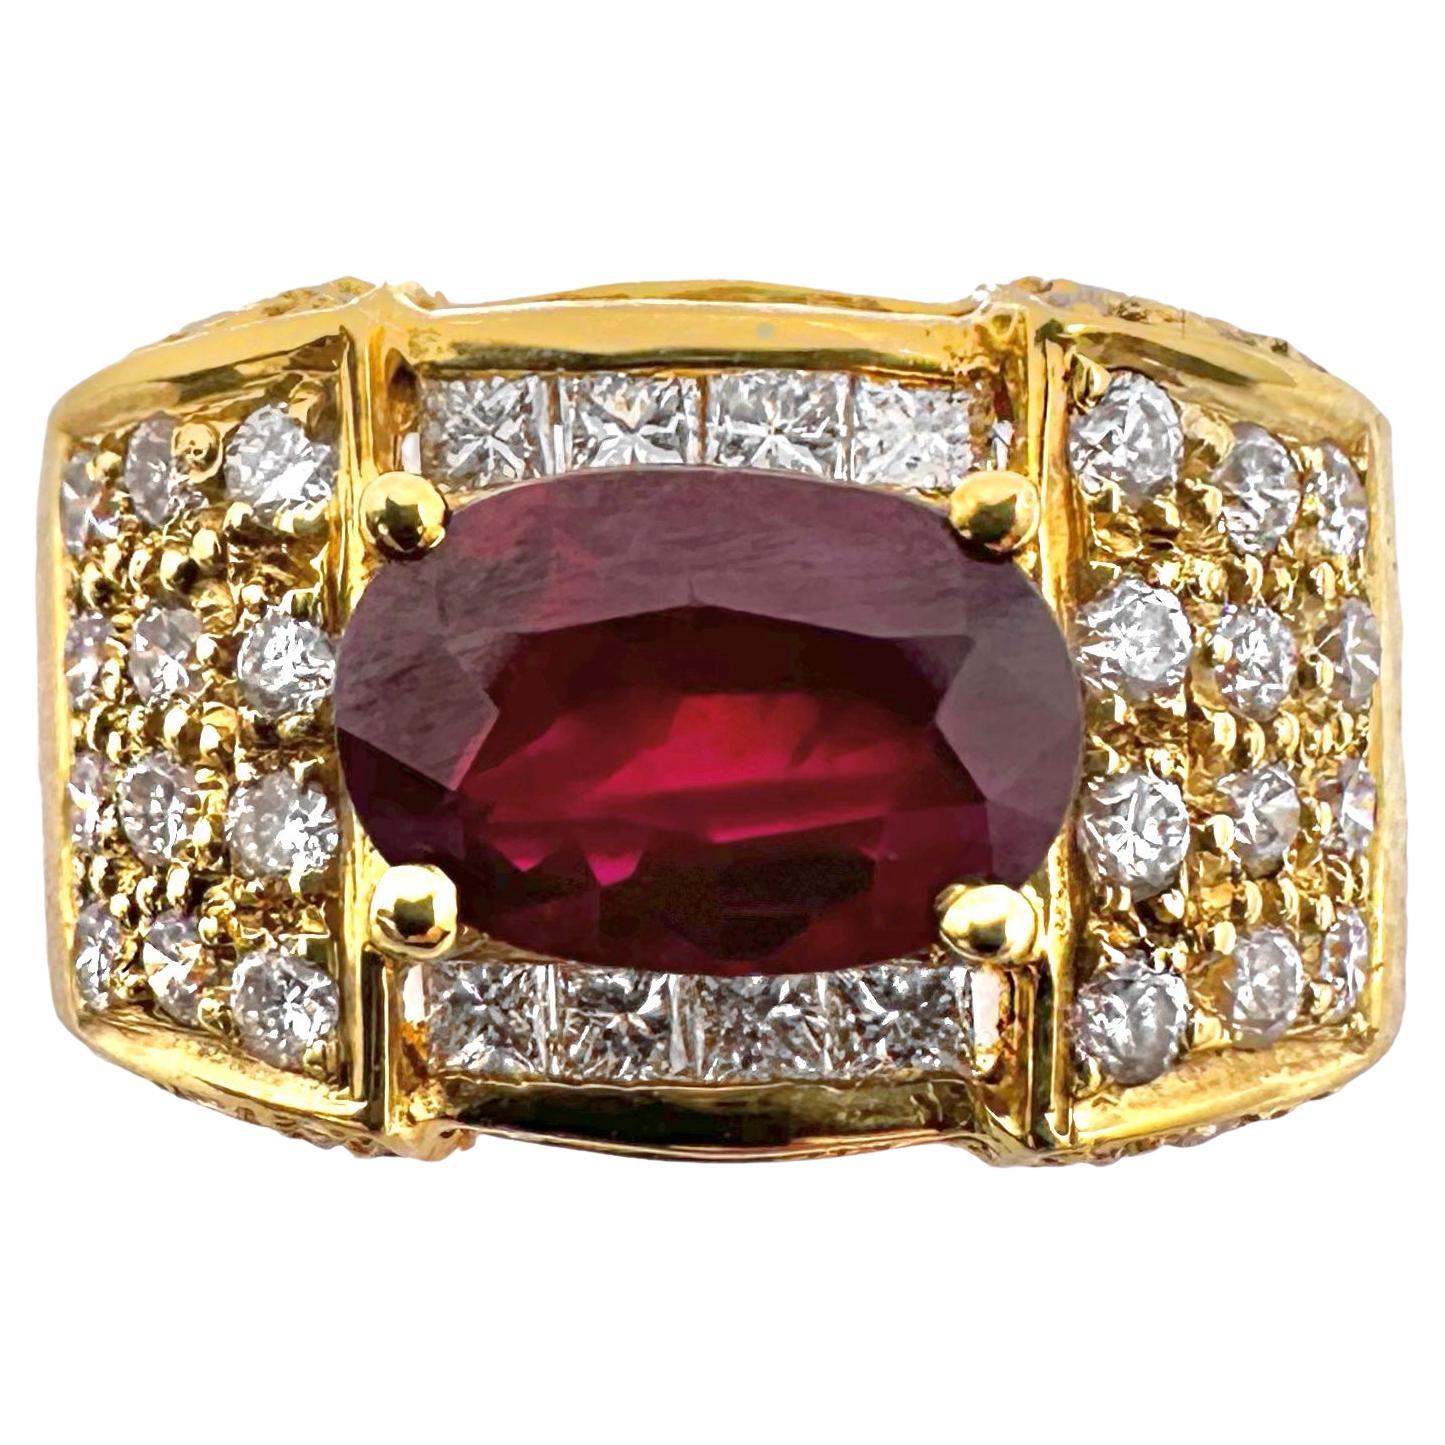 Late-20th Century Tailored 18k Yellow Gold, Ruby and Diamond Cocktail Ring For Sale